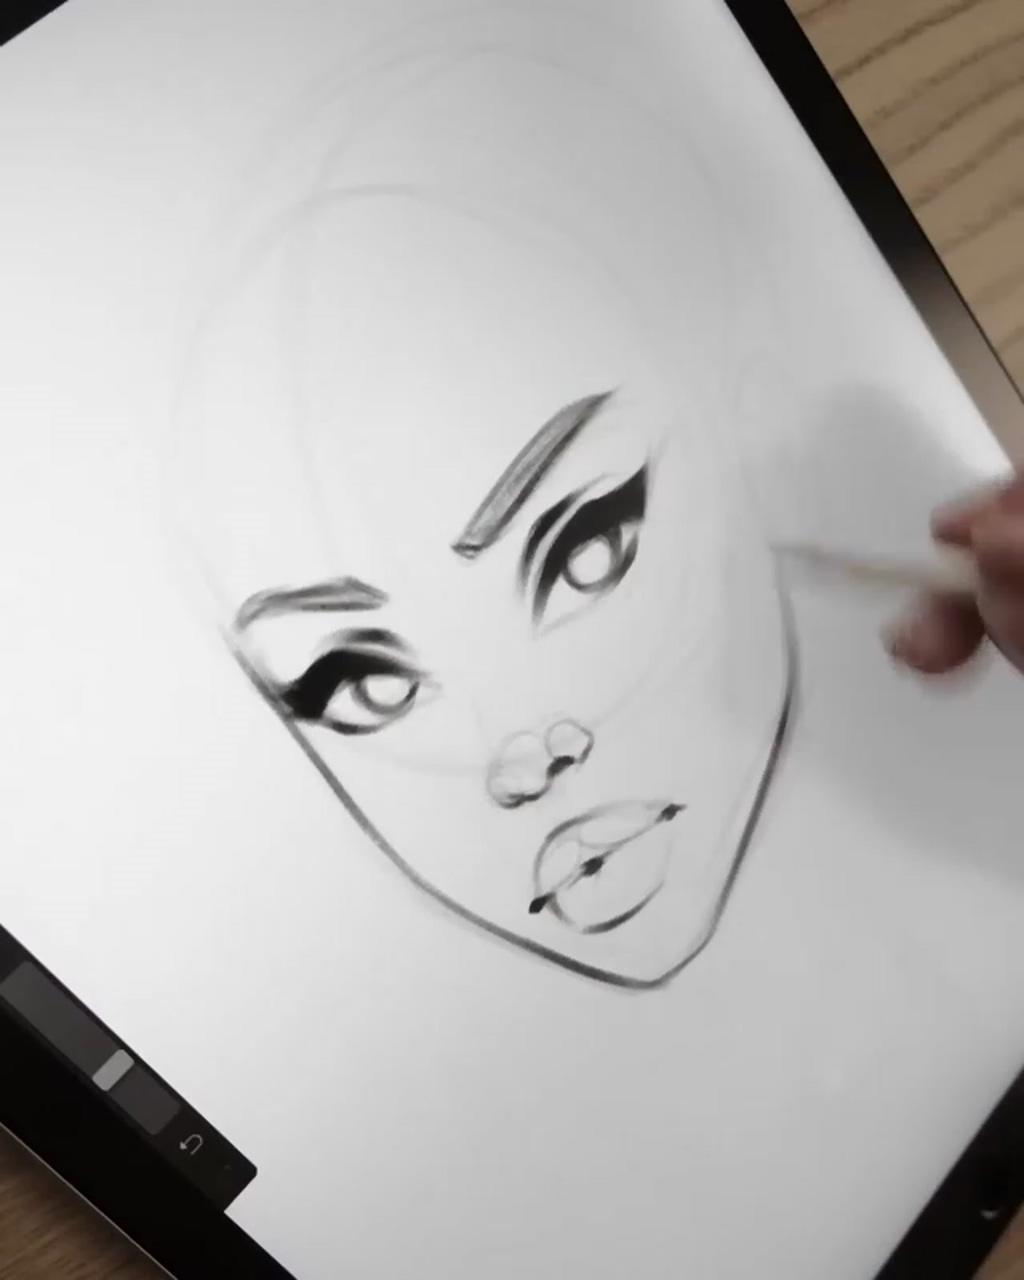 Asmr sketching on procreate by alicjanai; welcome to artwindstudio, to buy your favorite paintings